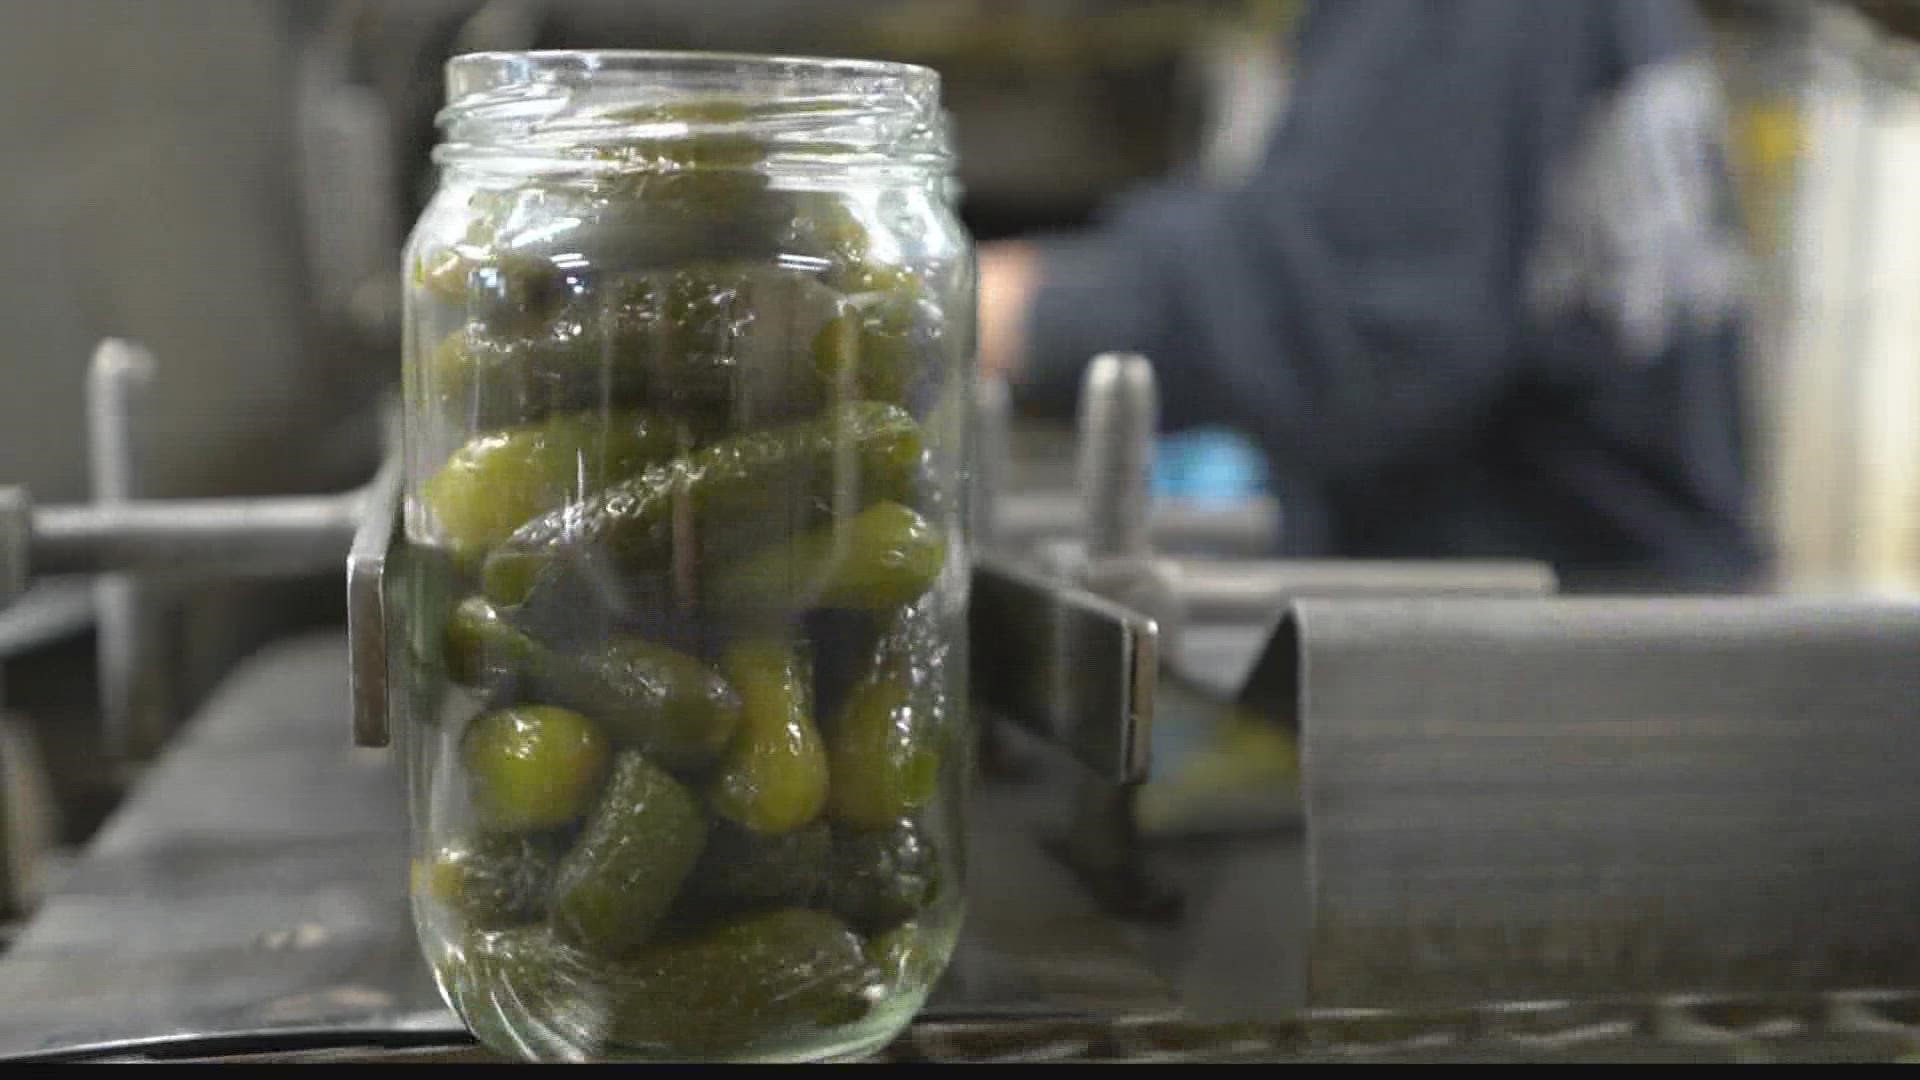 Chuck shows us a pickle maker that has been using the same recipe for 100 years!